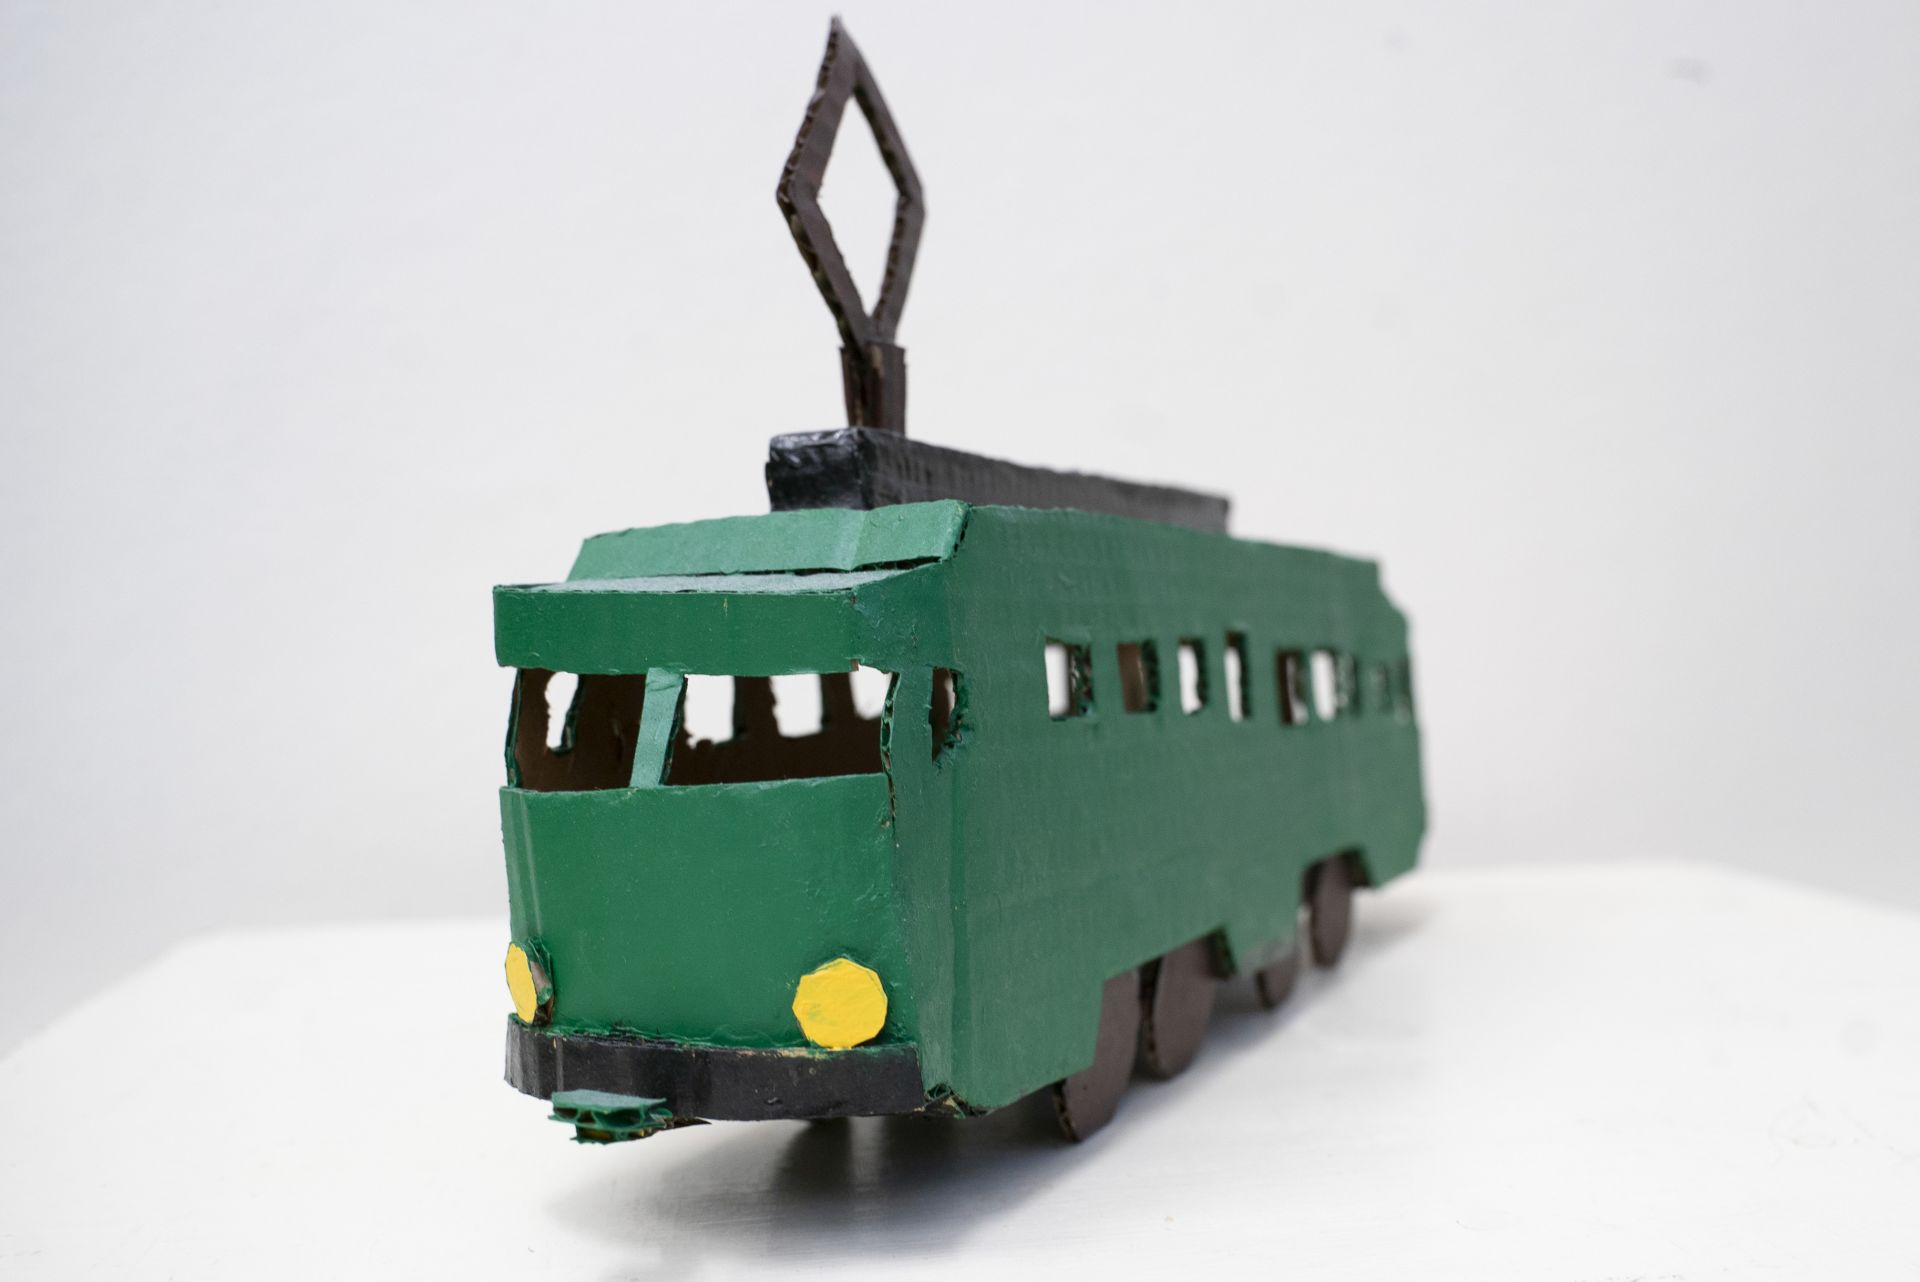 Cardboard miniature of an old Helsinki tram. The tram is painted in dark green with black and yellow detailing.